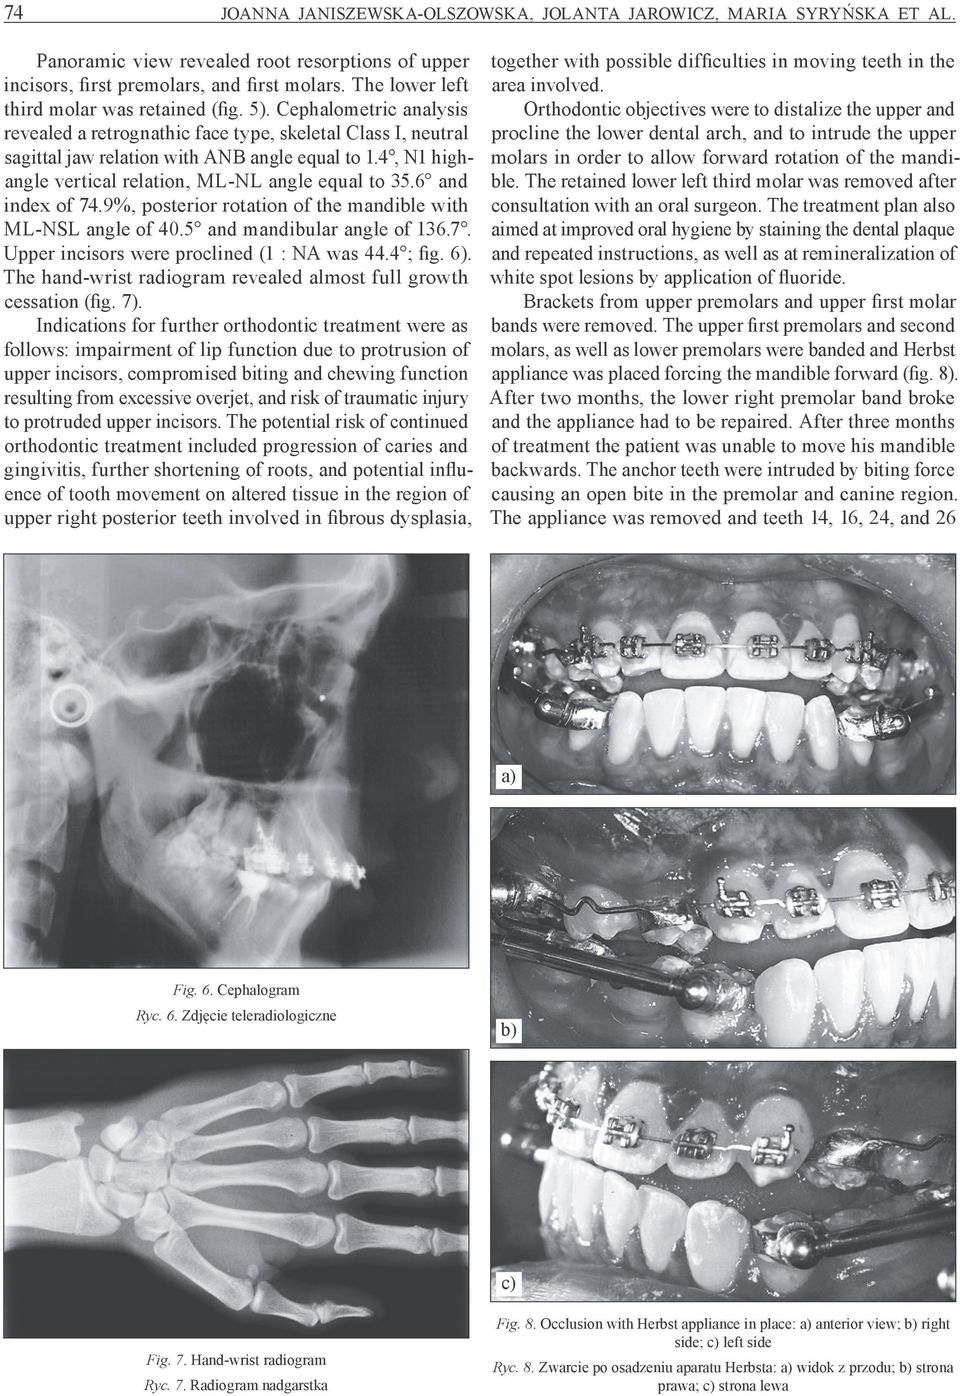 4, N1 highangle vertical relation, ML-NL angle equal to 35.6 and index of 74.9%, posterior rotation of the mandible with ML-NSL angle of 40.5 and mandibular angle of 136.7. Upper incisors were proclined (1 : NA was 44.